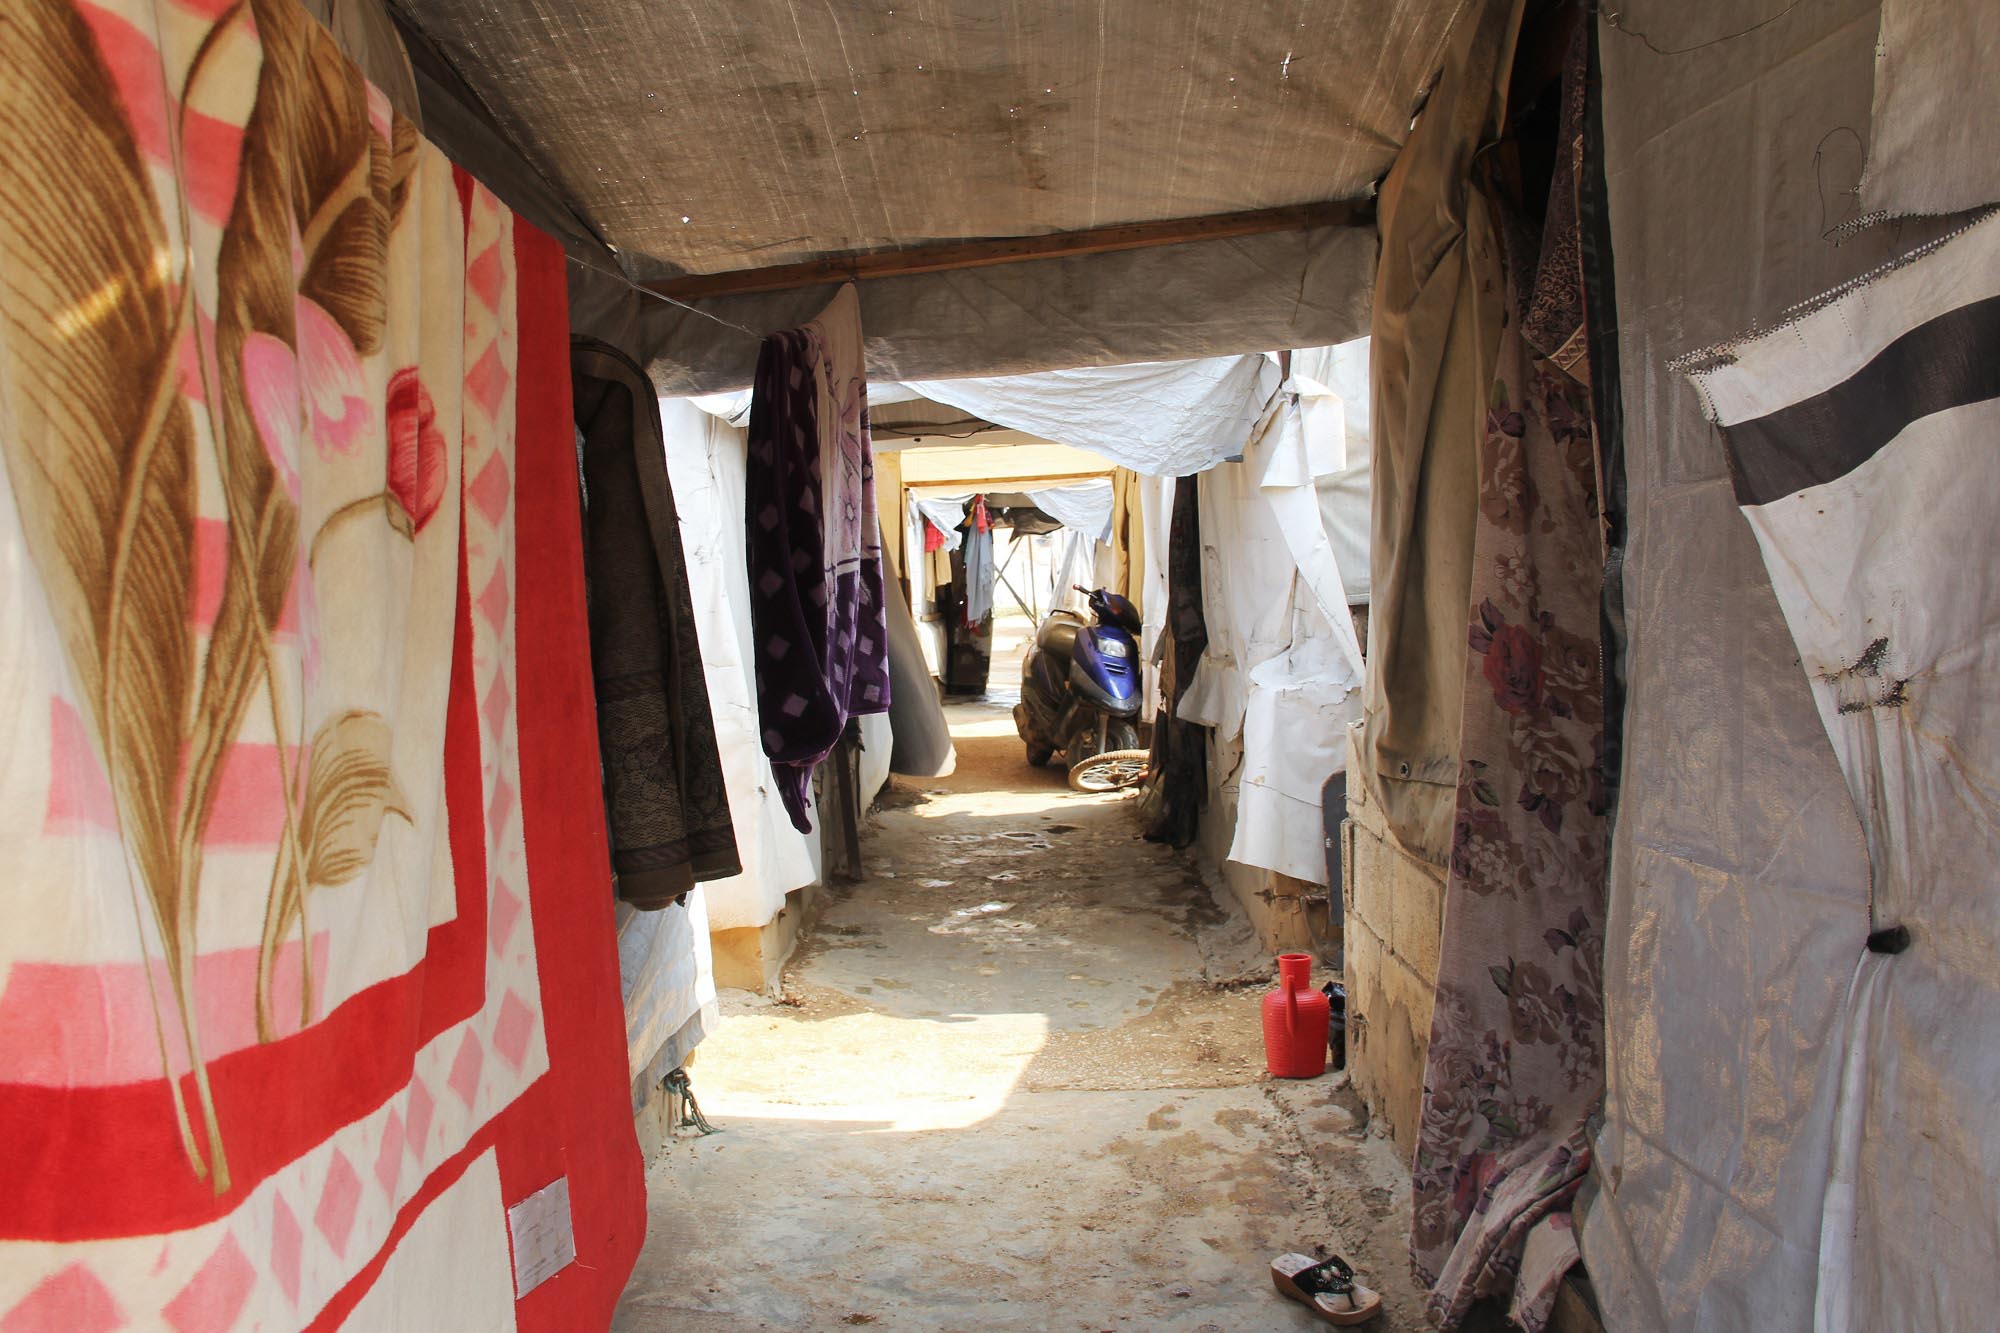 The crowded Rihaniyeh Camp is home to more than 250 families